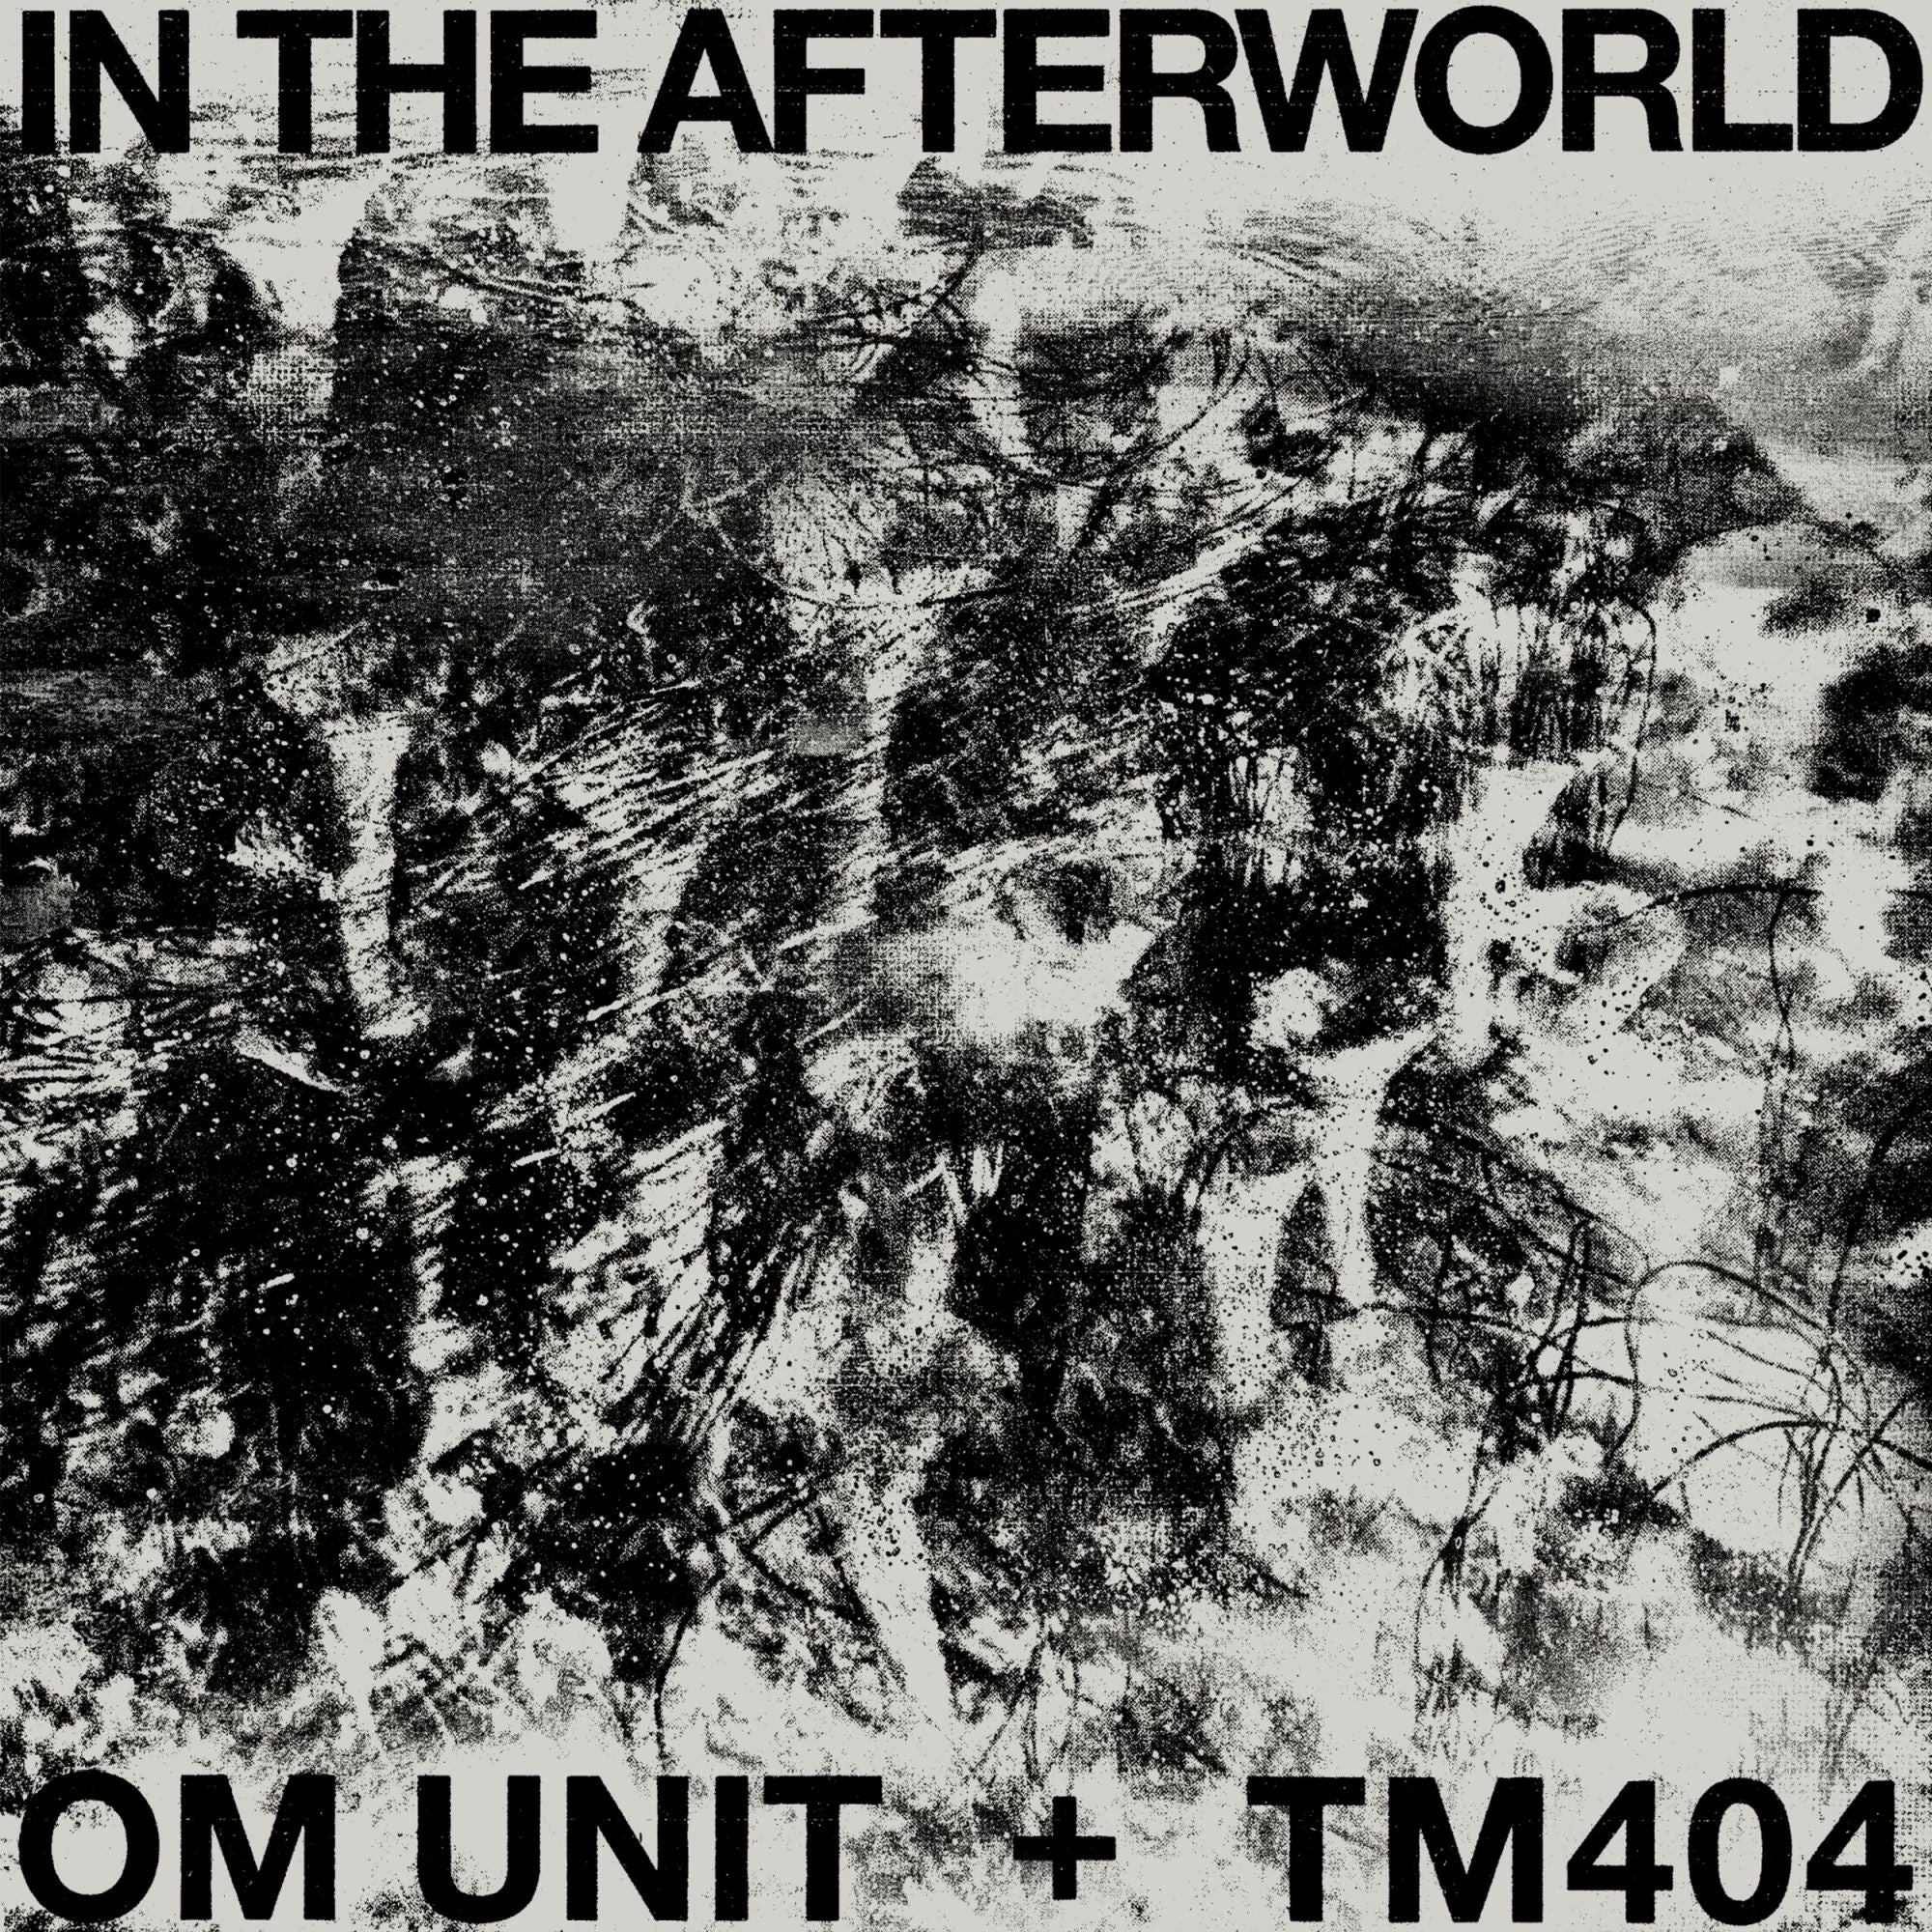 OM UNIT + TM404 'IN THE AFTERWORLD' 12"